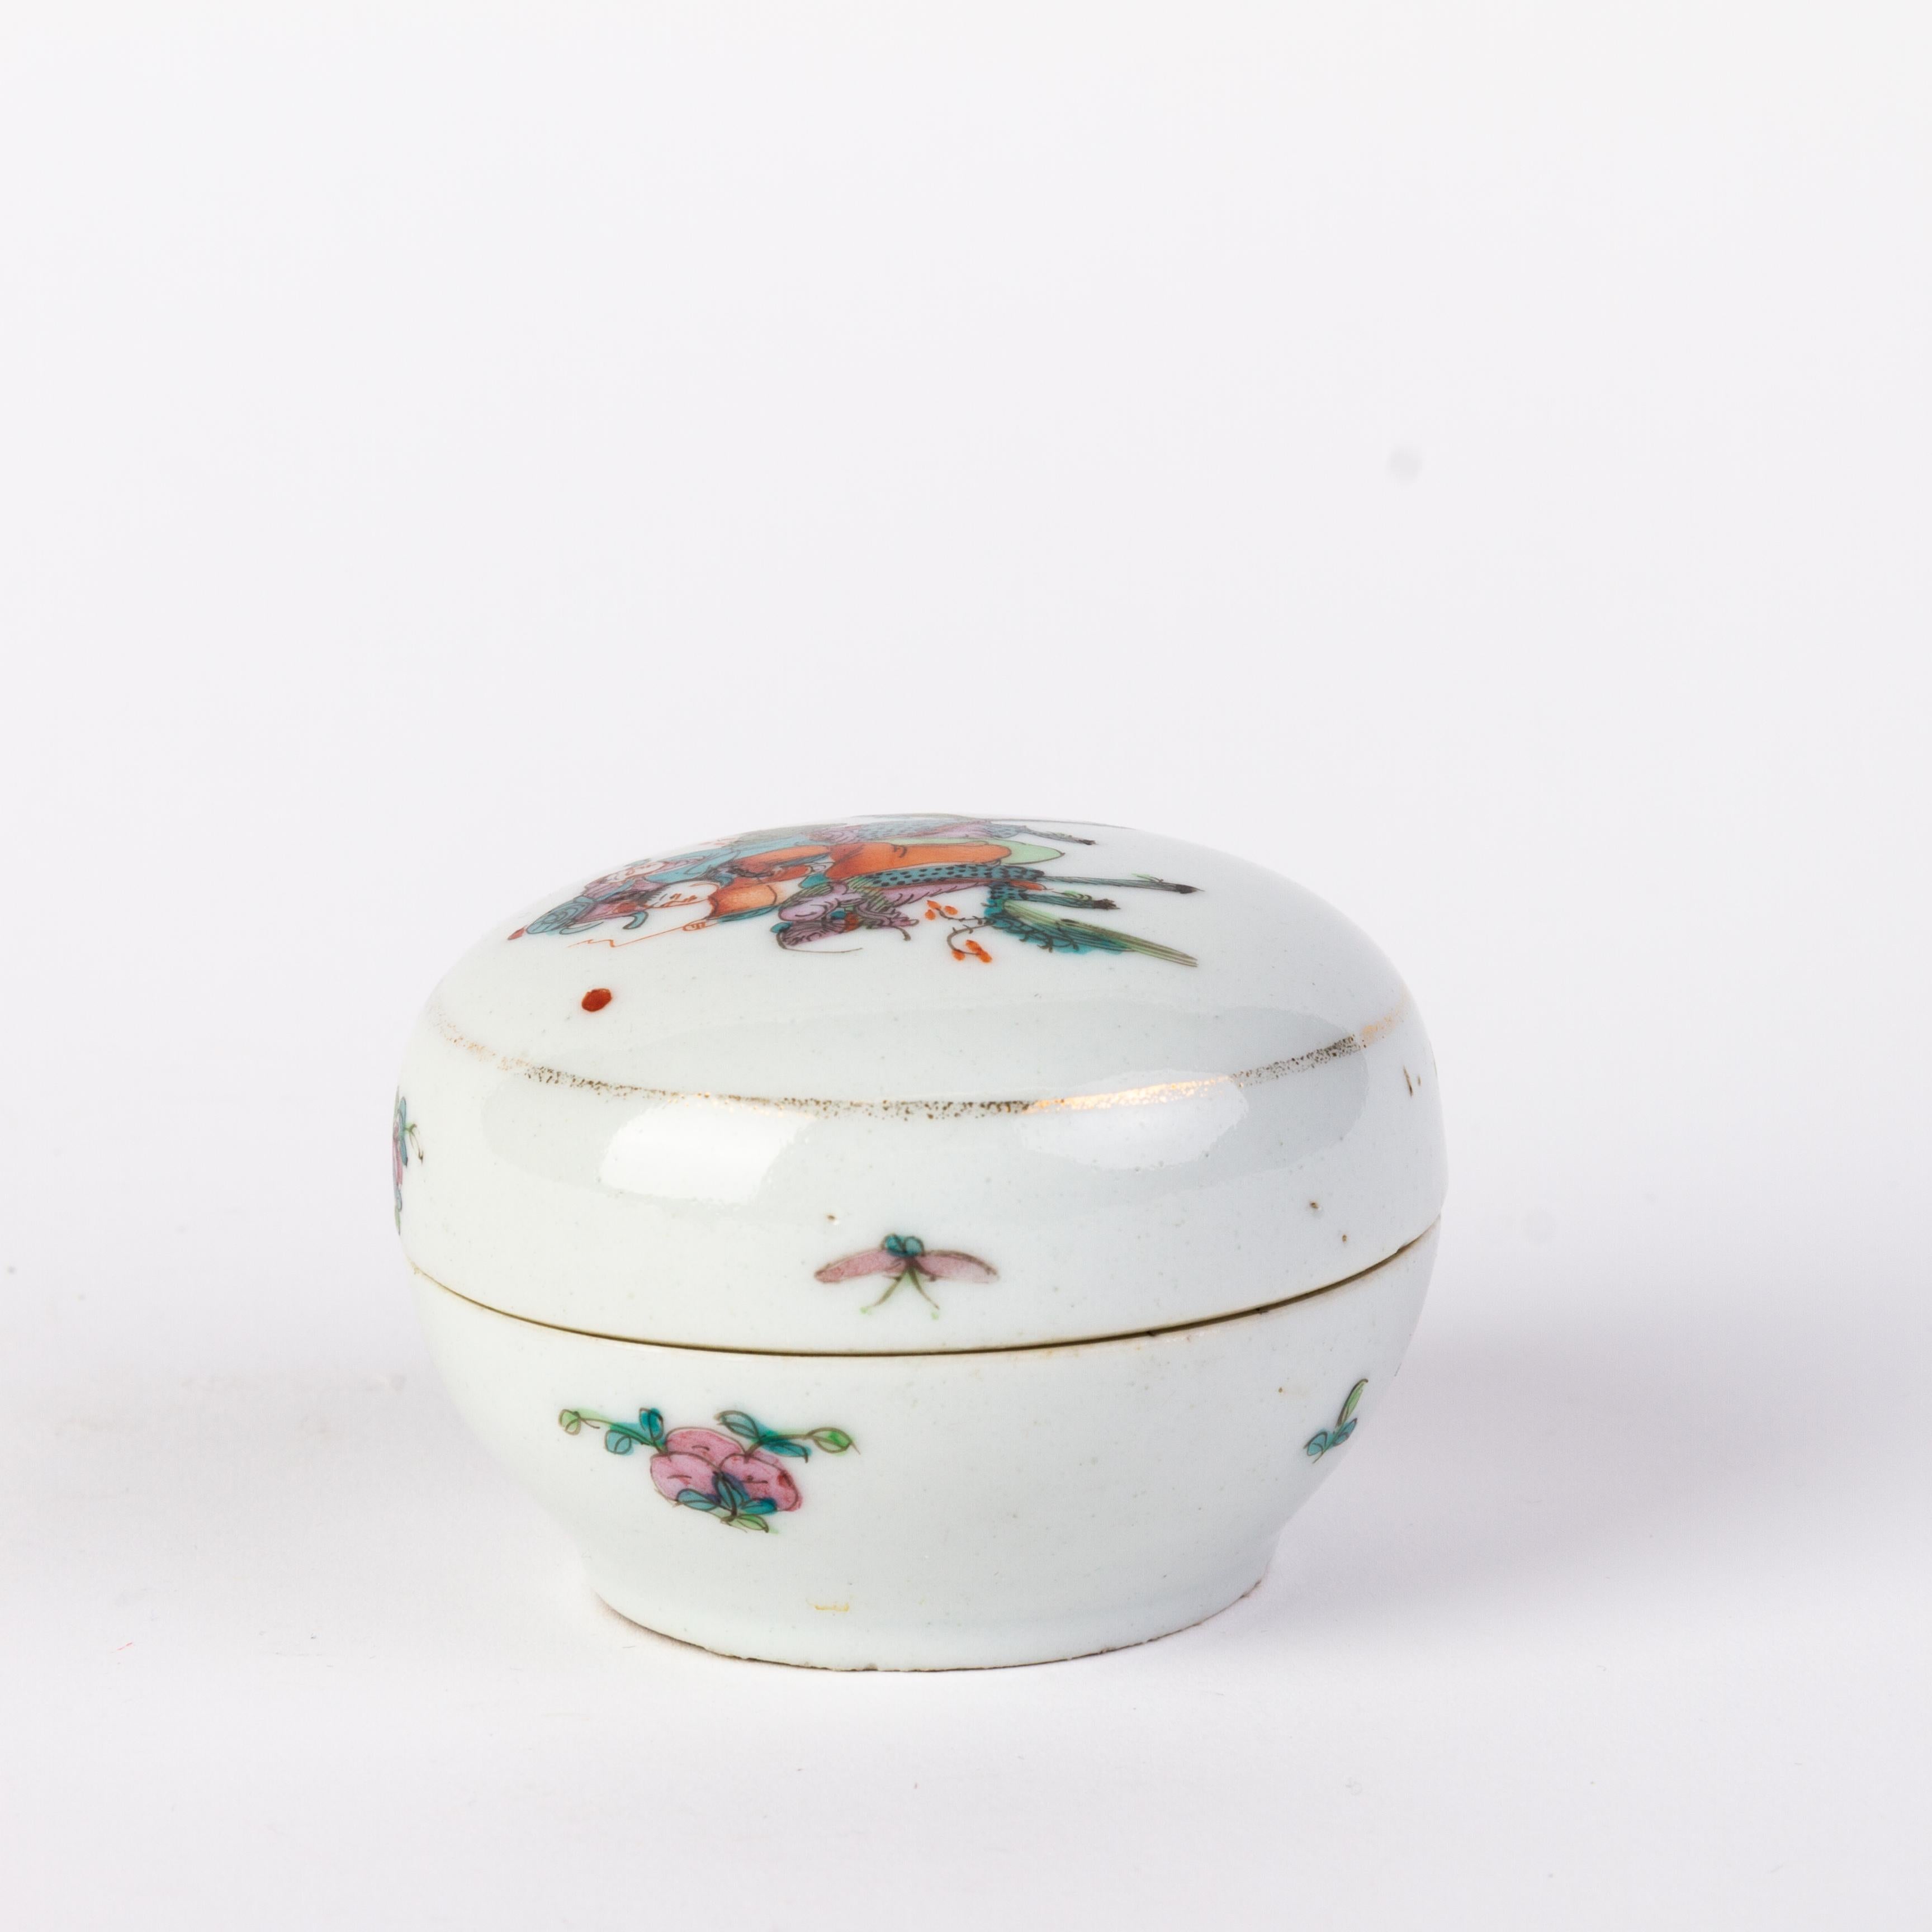 Chinese Republic Period Famille Rose Porcelain Lidded Box 
Good condition 
From a private collection.
Free international shipping.